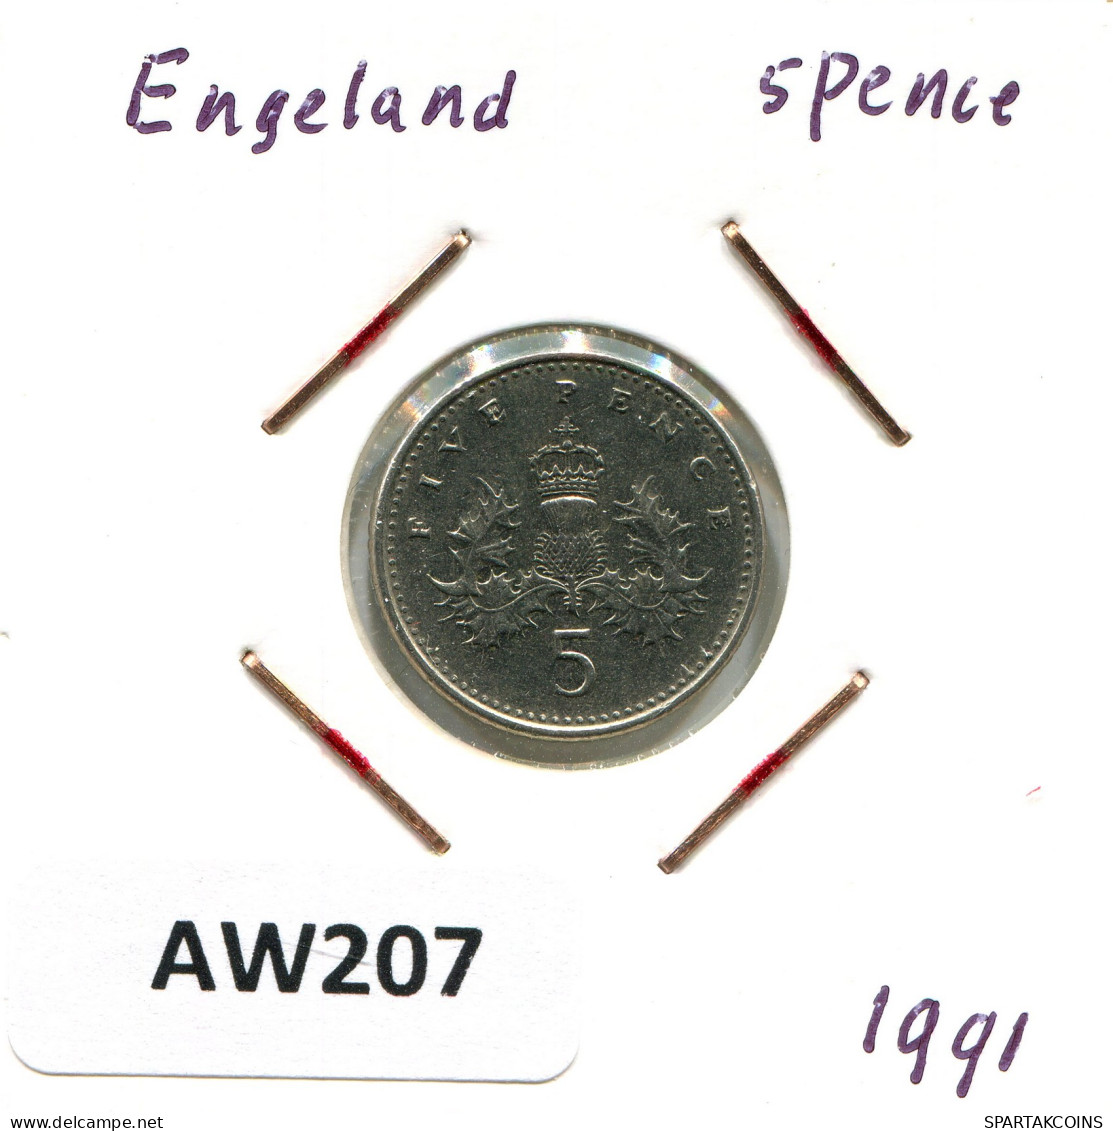 5 PENCE 1991 UK GRANDE-BRETAGNE GREAT BRITAIN Pièce #AW207.F - 5 Pence & 5 New Pence